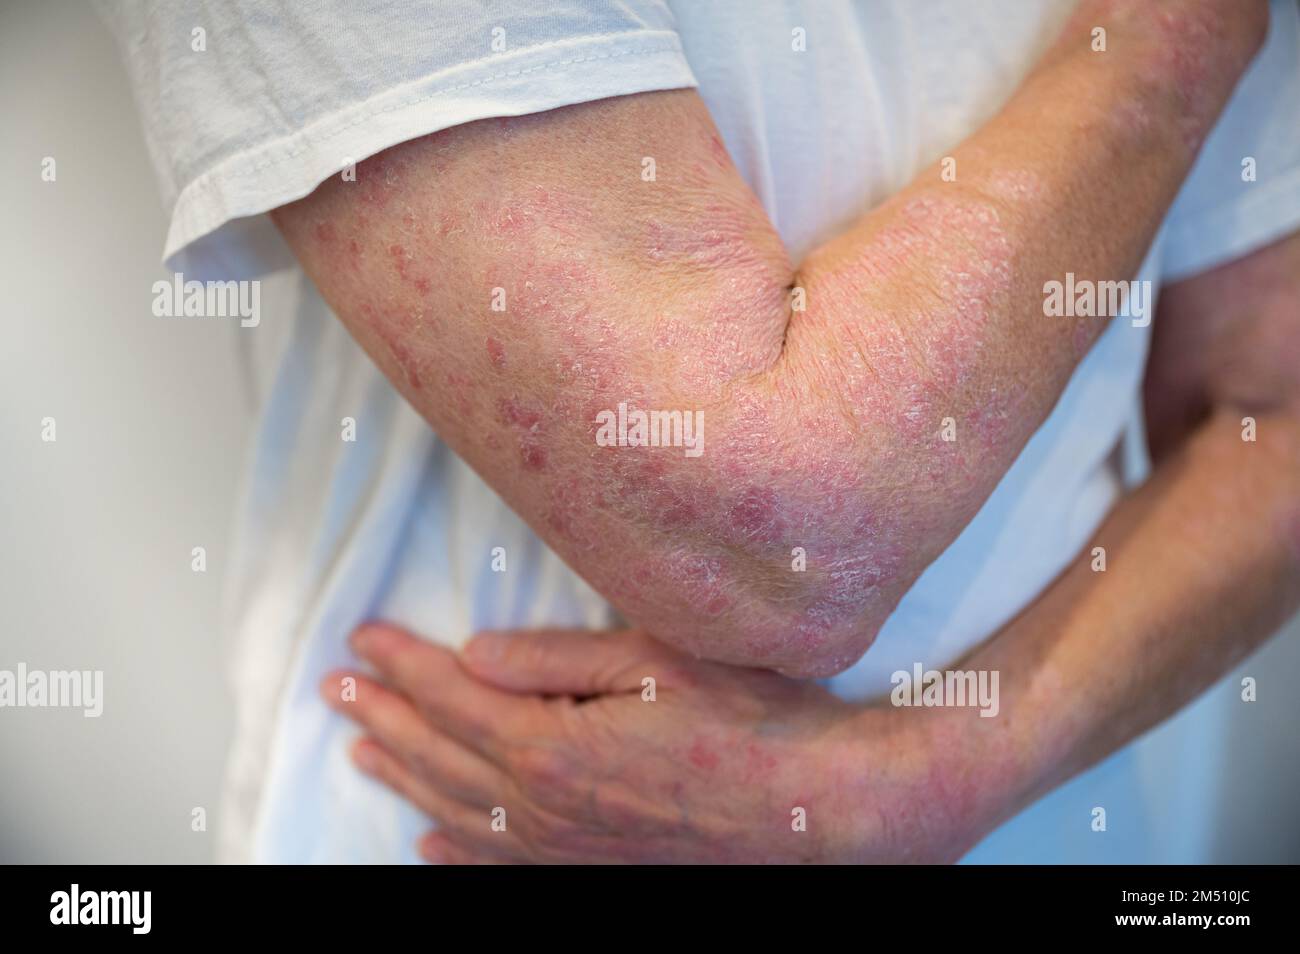 Skin disease psoriasis on arm and hand Stock Photo